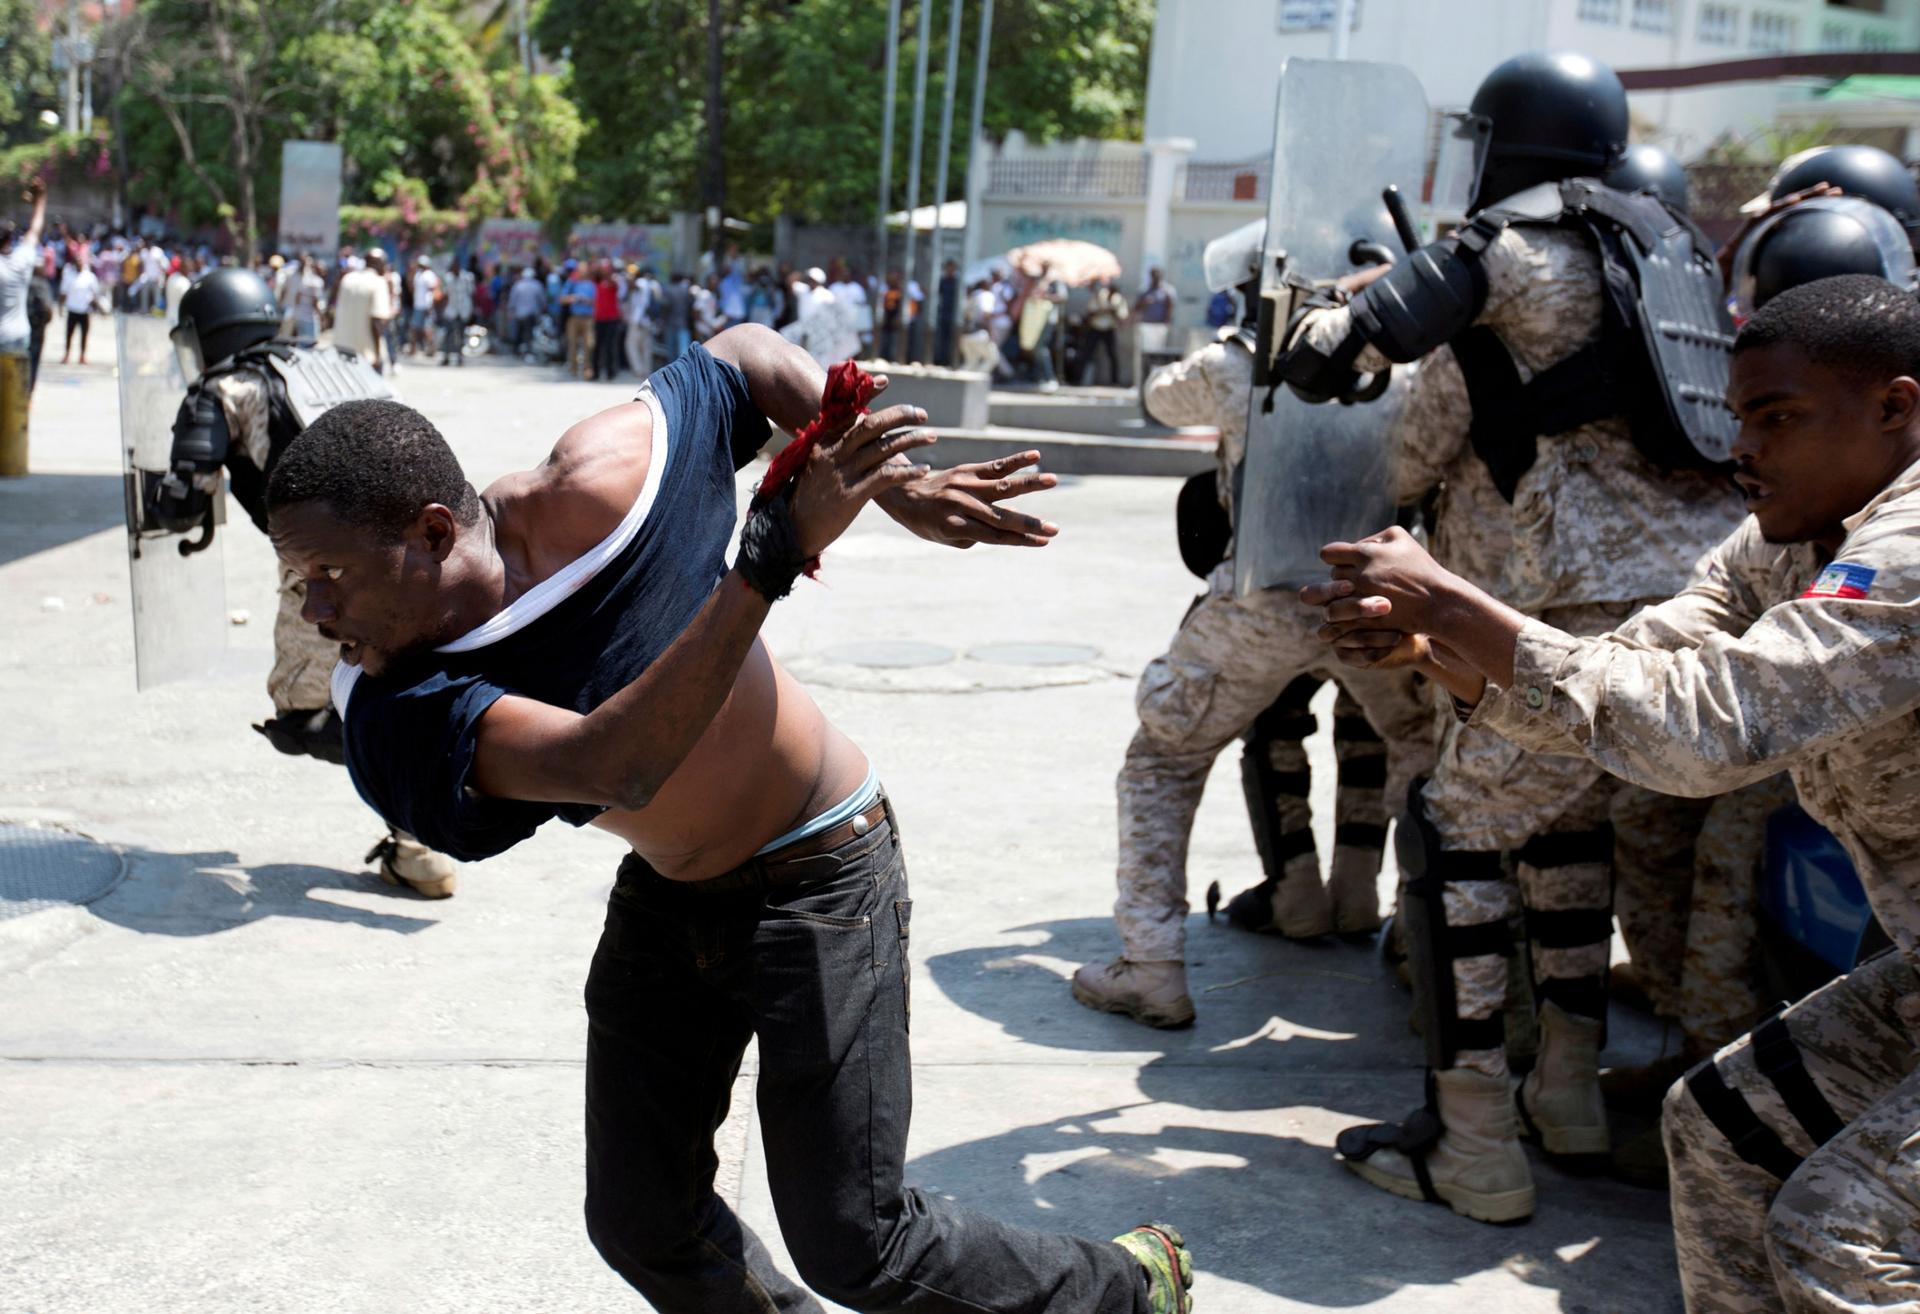 A demonstrator is shown running from Haitian security authorities with his blue shirt almost torn off.